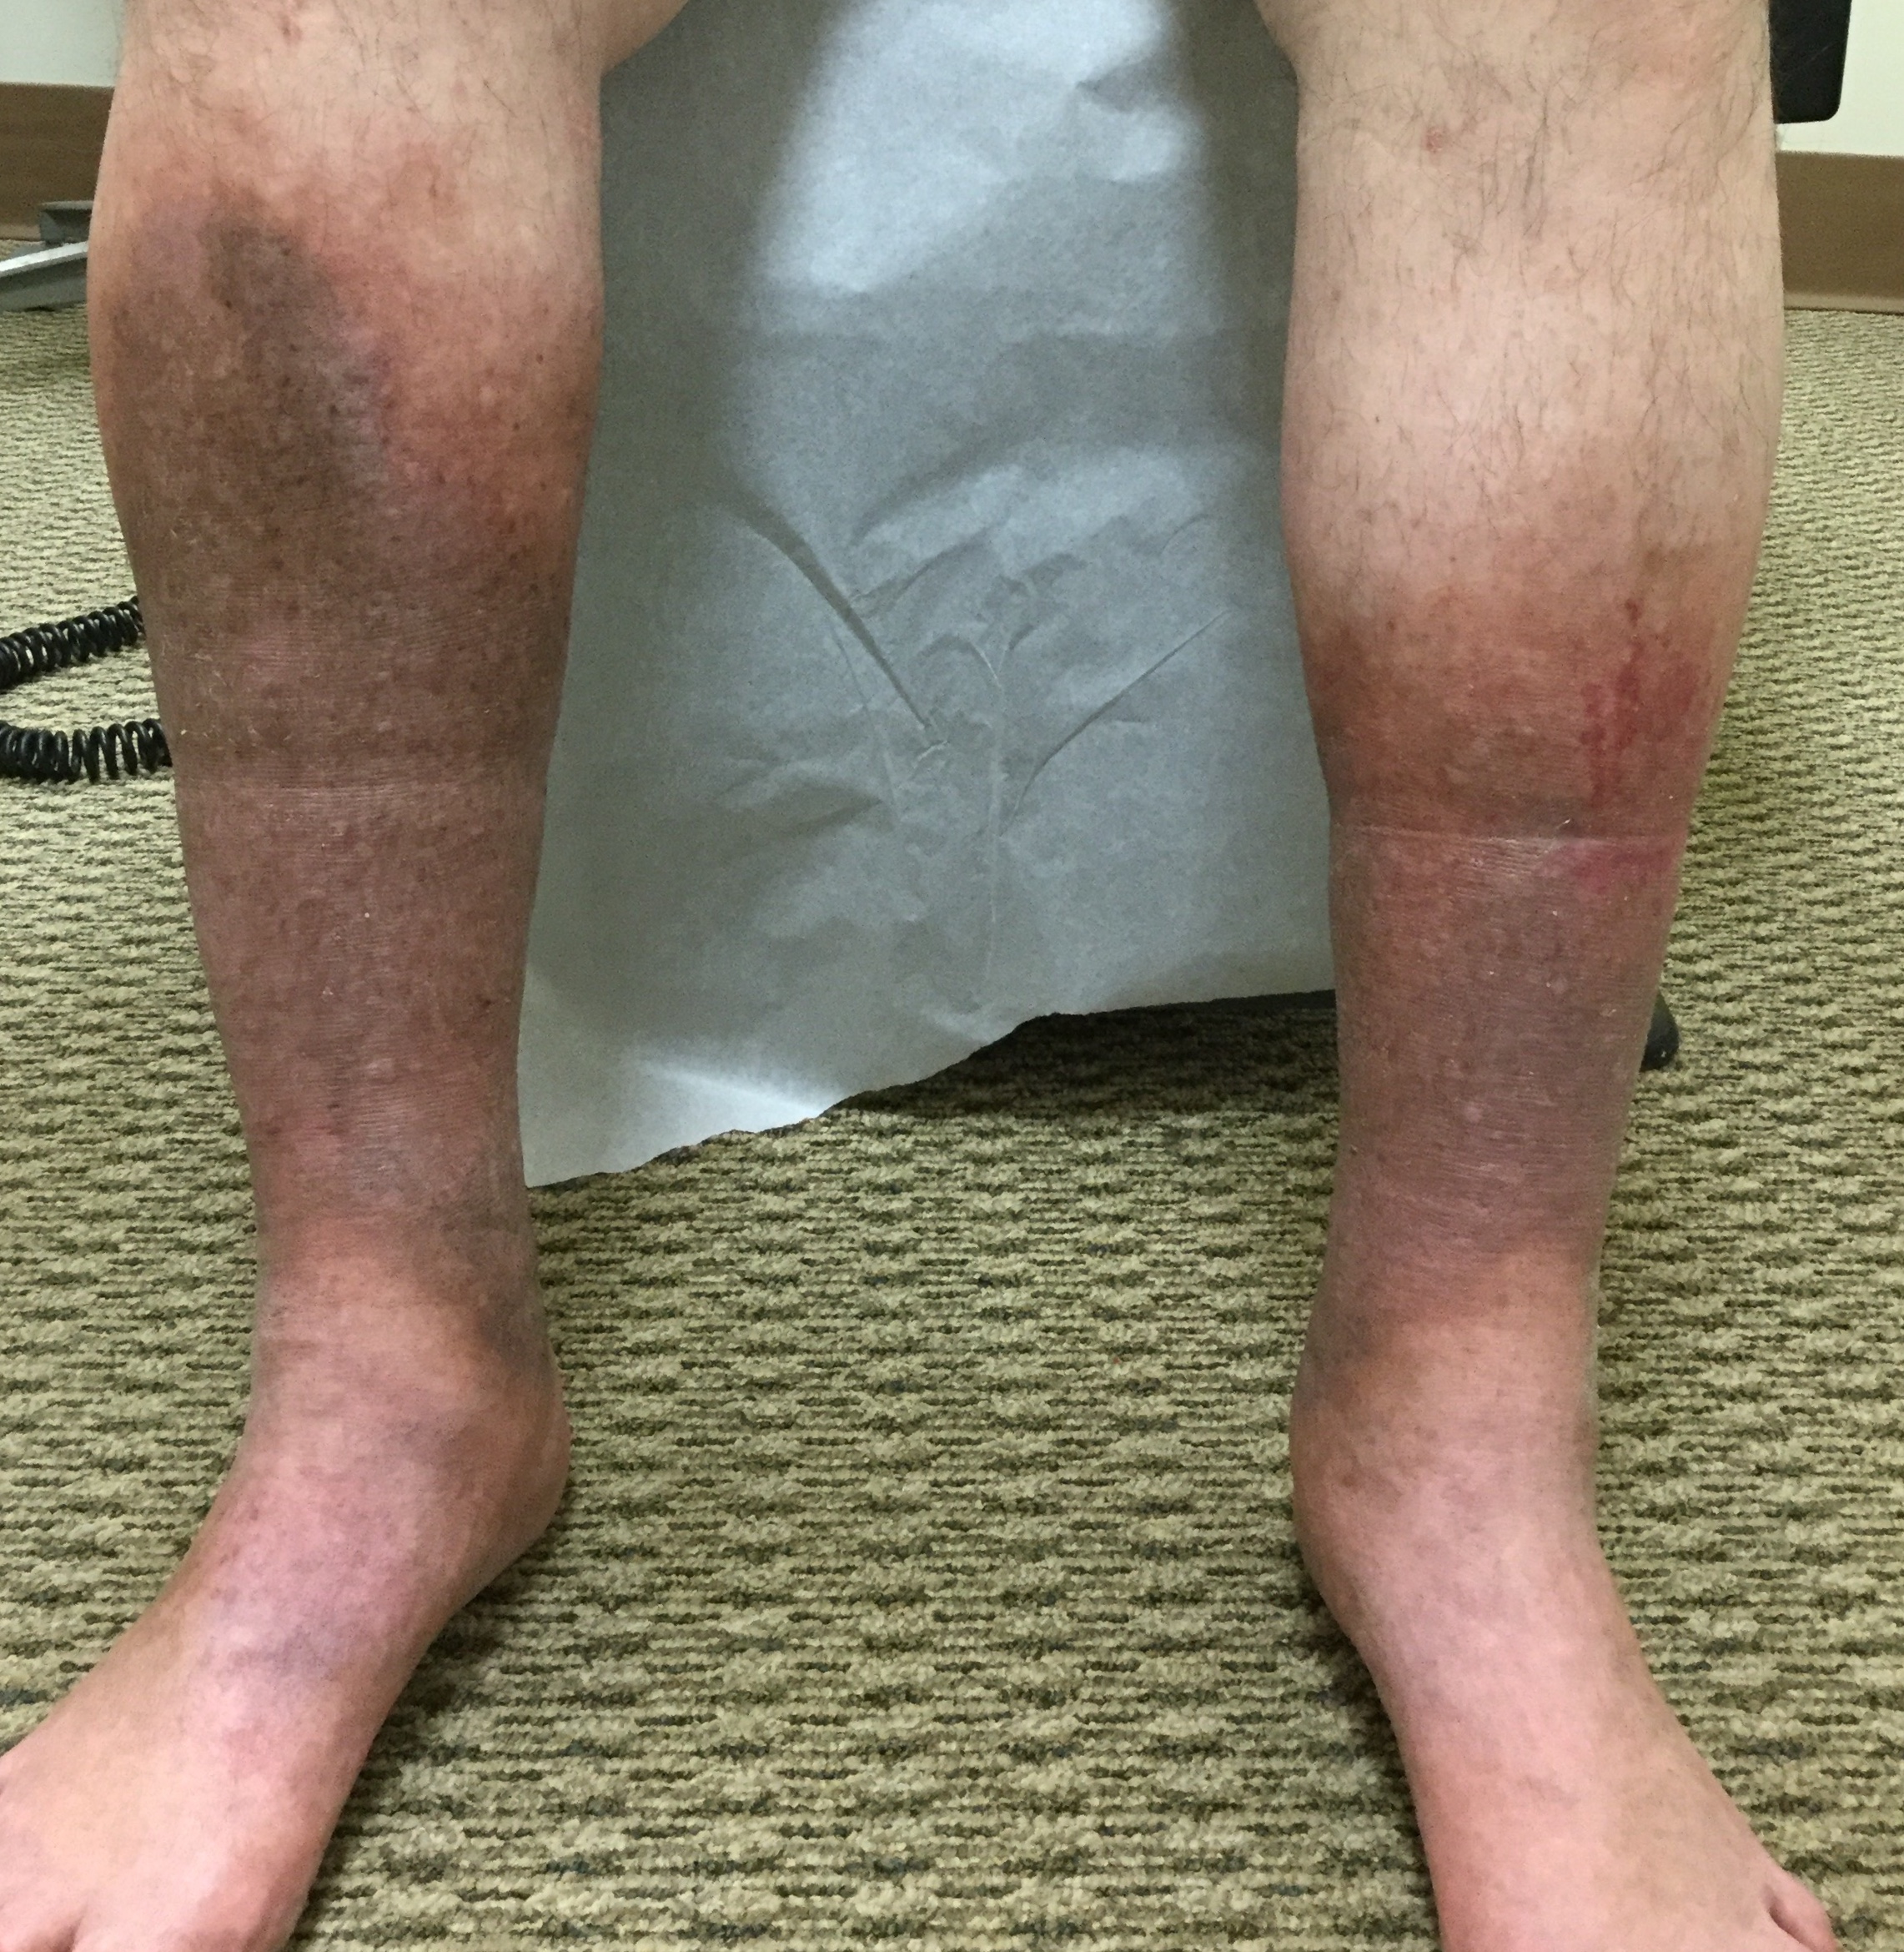 Why Do I Have Brown Spots on My Legs?